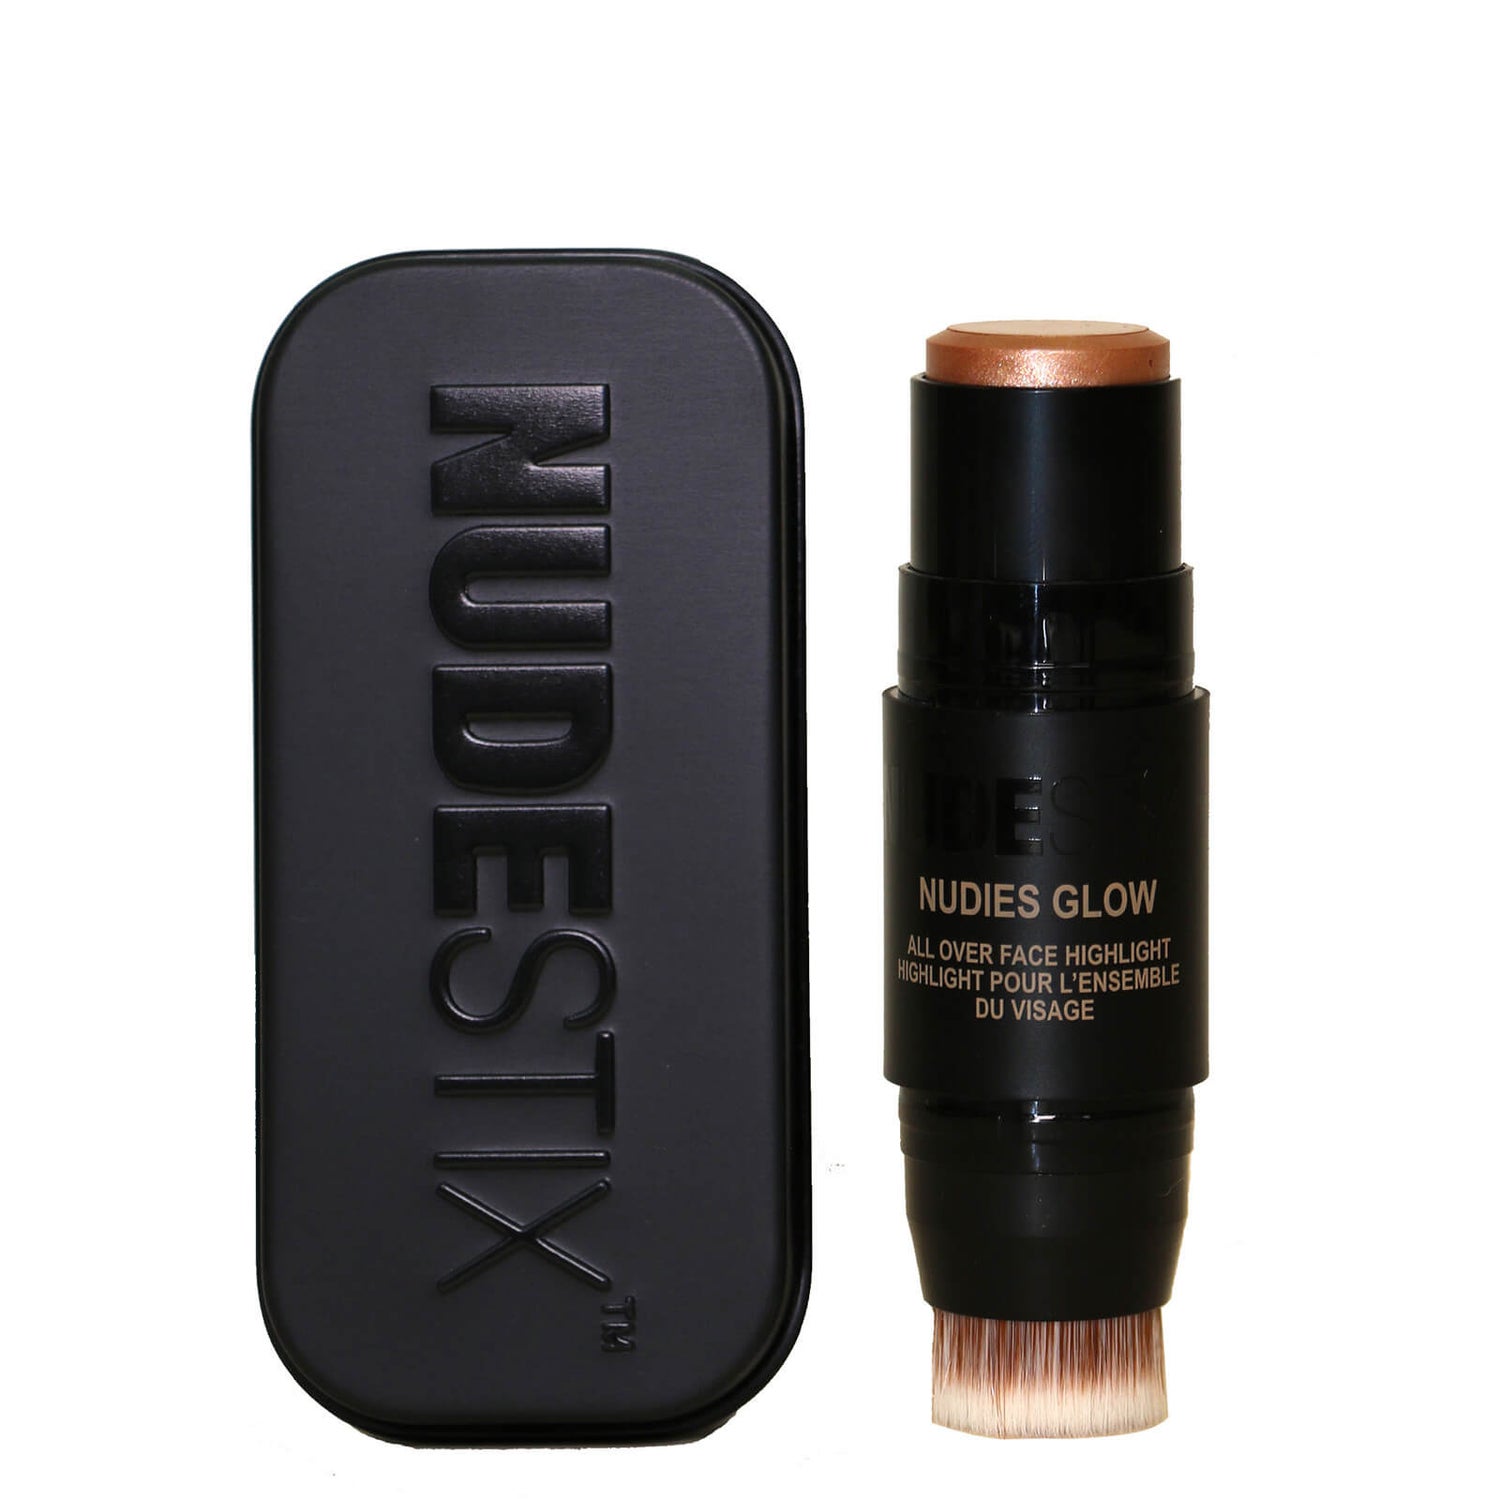 NUDESTIX Nudies Glow All Over Face Highlight Colour 8g (Various Shades)